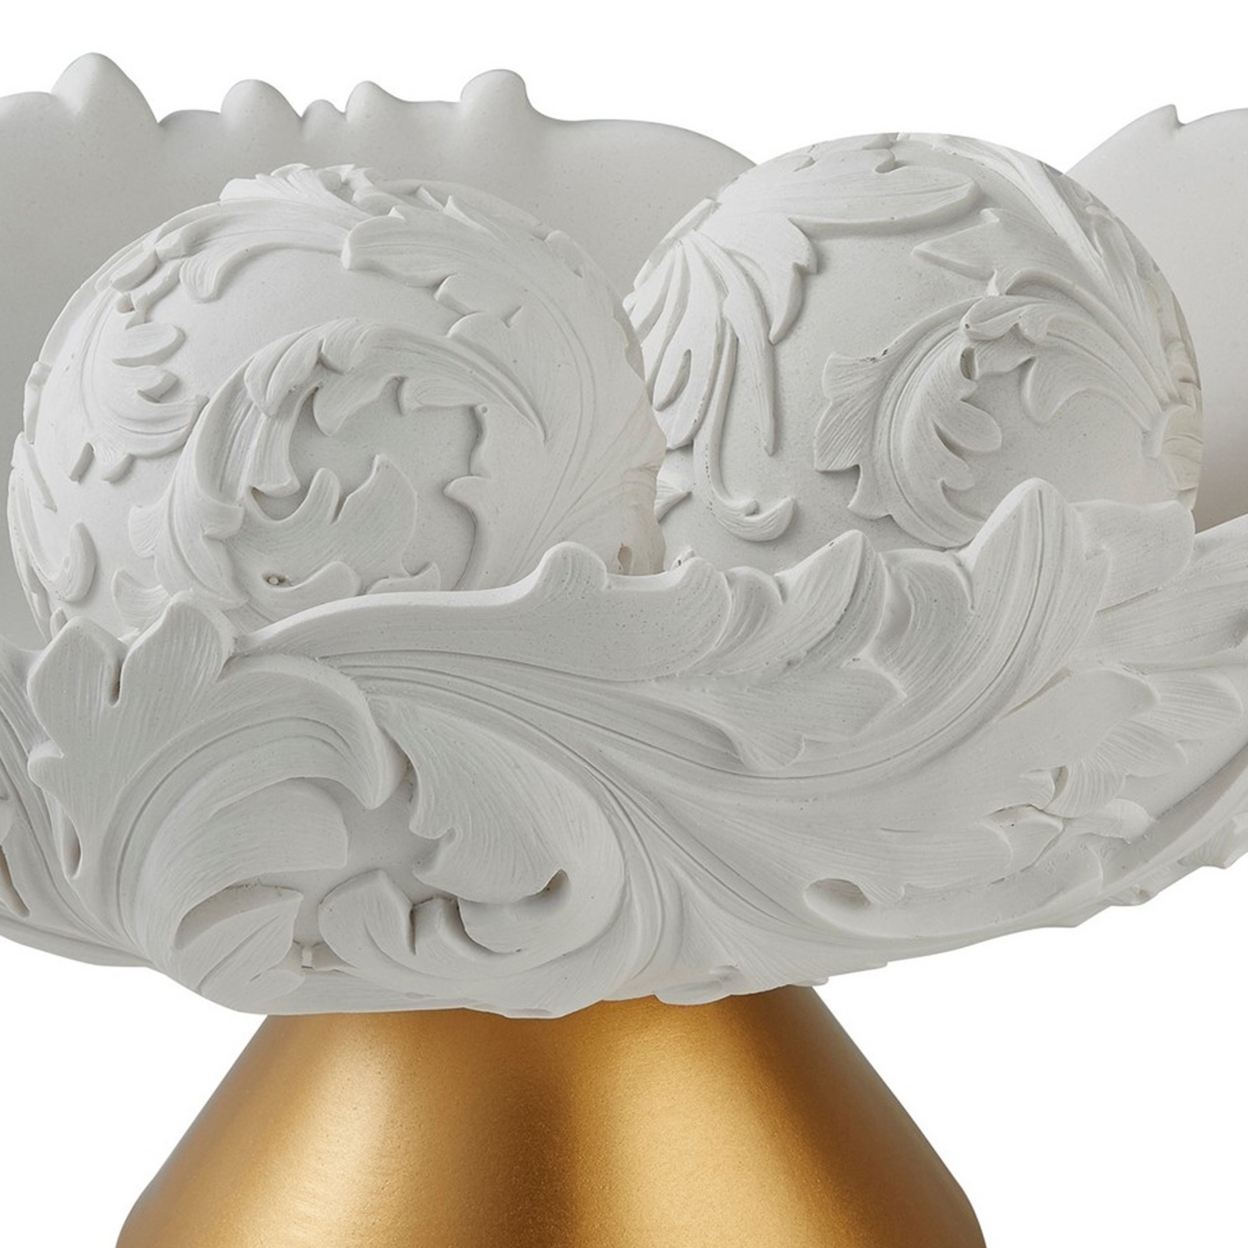 Bowl With Baroque Scroll Design With 2 Spheres, White- Saltoro Sherpi